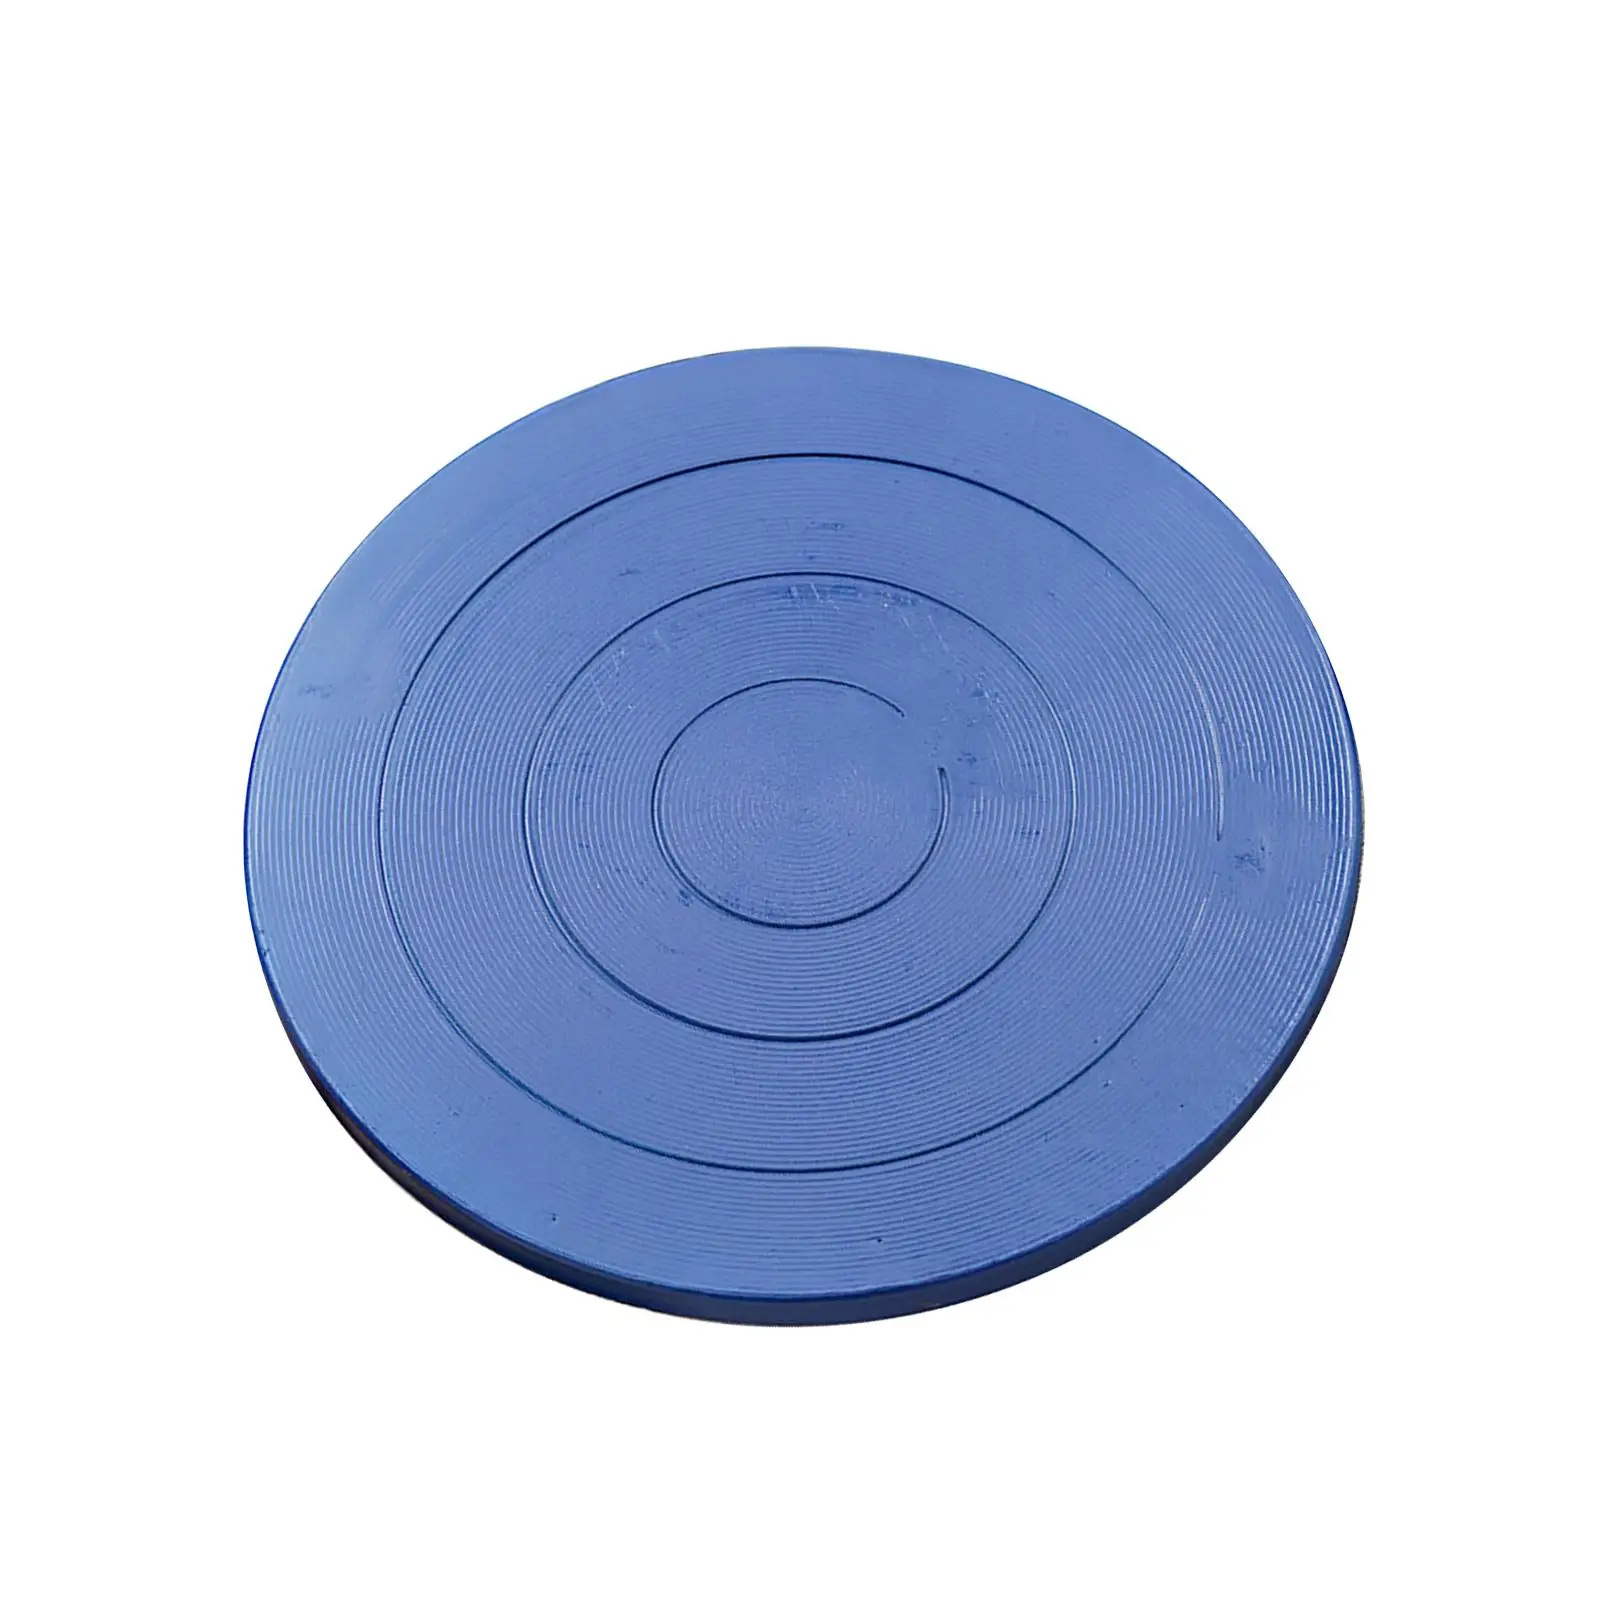 Pottery Turntable Wheel for Sculpting Pottery Decorating Banding Wheel Cast Iron Pottery Wheel Double Side Revolving Cake Stand